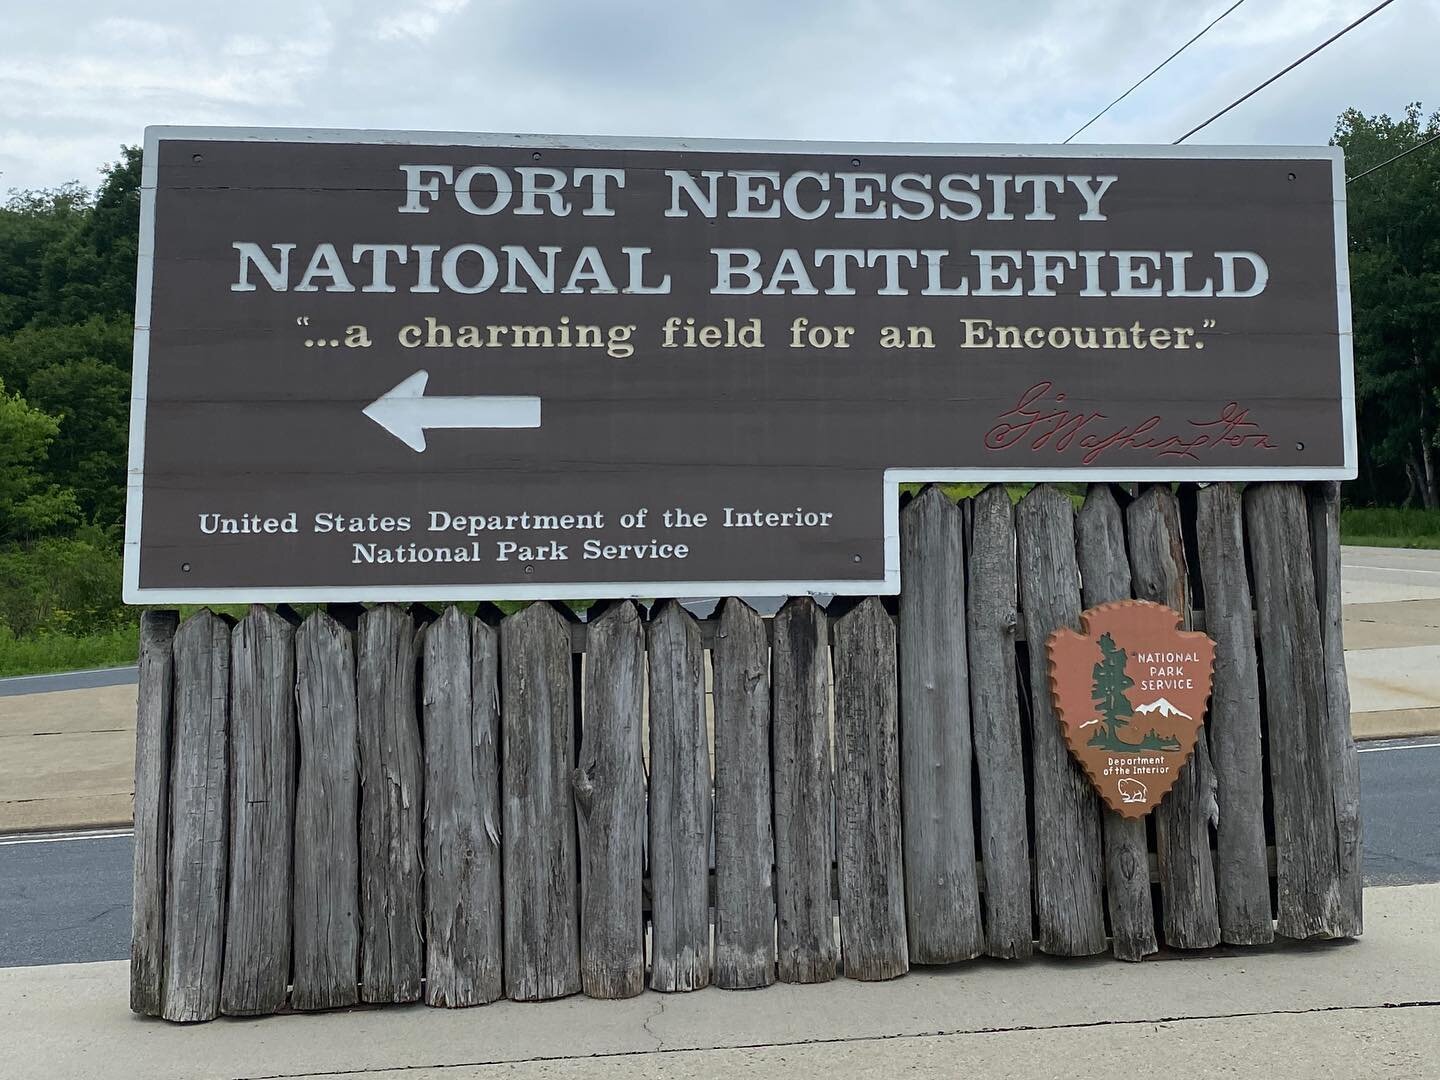 George Washington called it &ldquo;a charming field for an encounter,&rdquo; the battle at Fort Necessity in 1745 was the beginning of the French and Indian War, and set the stage for the American Revolution. Today, Fort Necessity National Battlefiel